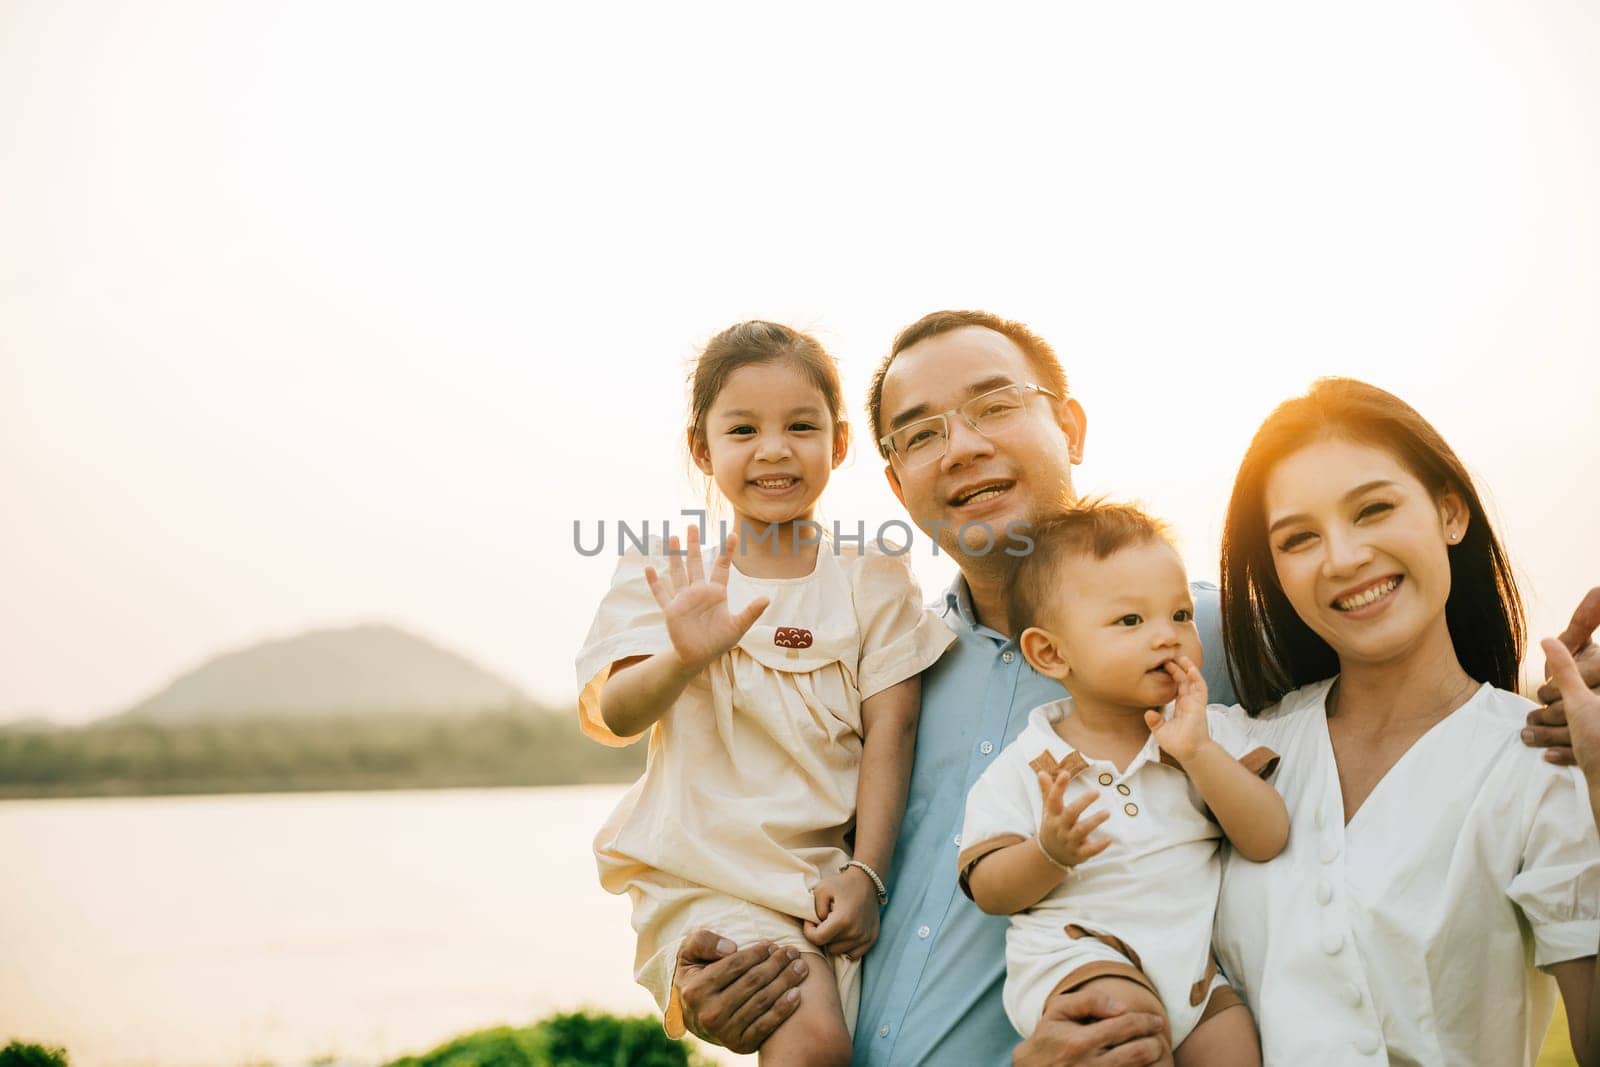 Portrait of happy family enjoying a beautiful spring day in park, with their cute baby and lovely nature surrounding them outdoor. young couple holding their adorable baby and enjoying stunning sunset